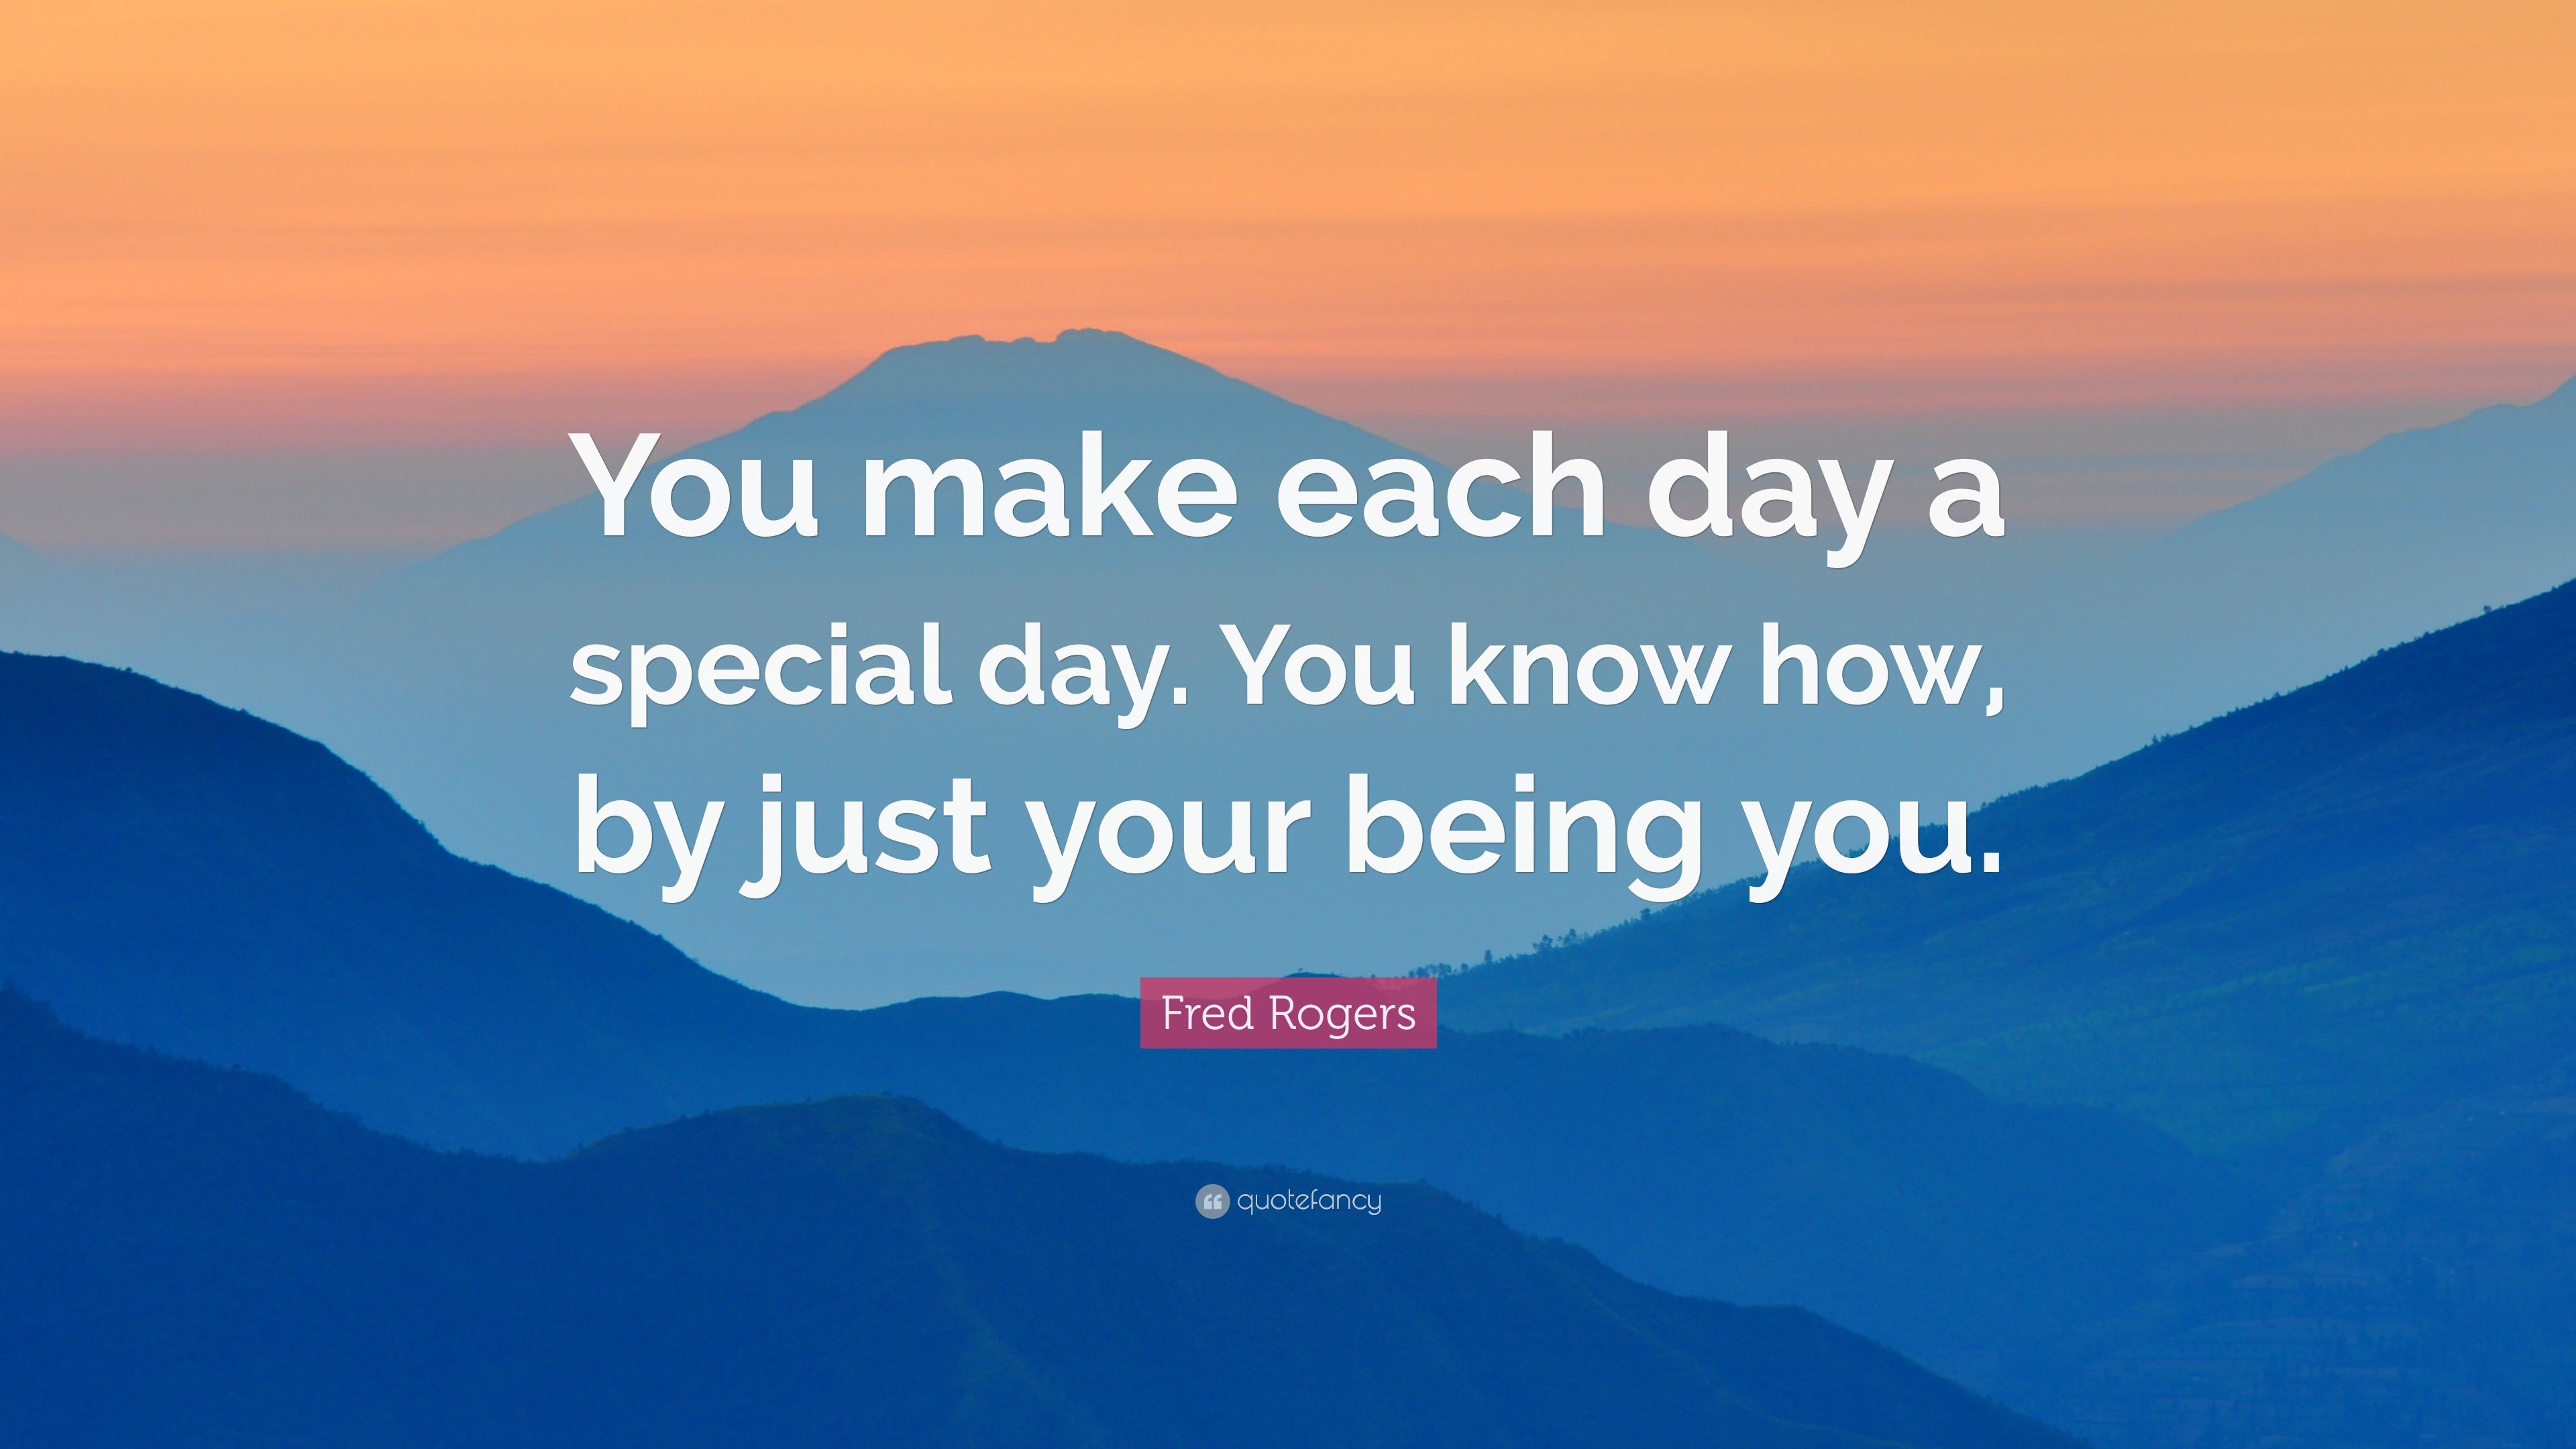 Fred Rogers Quote: “You make each day a special day. You know how, by